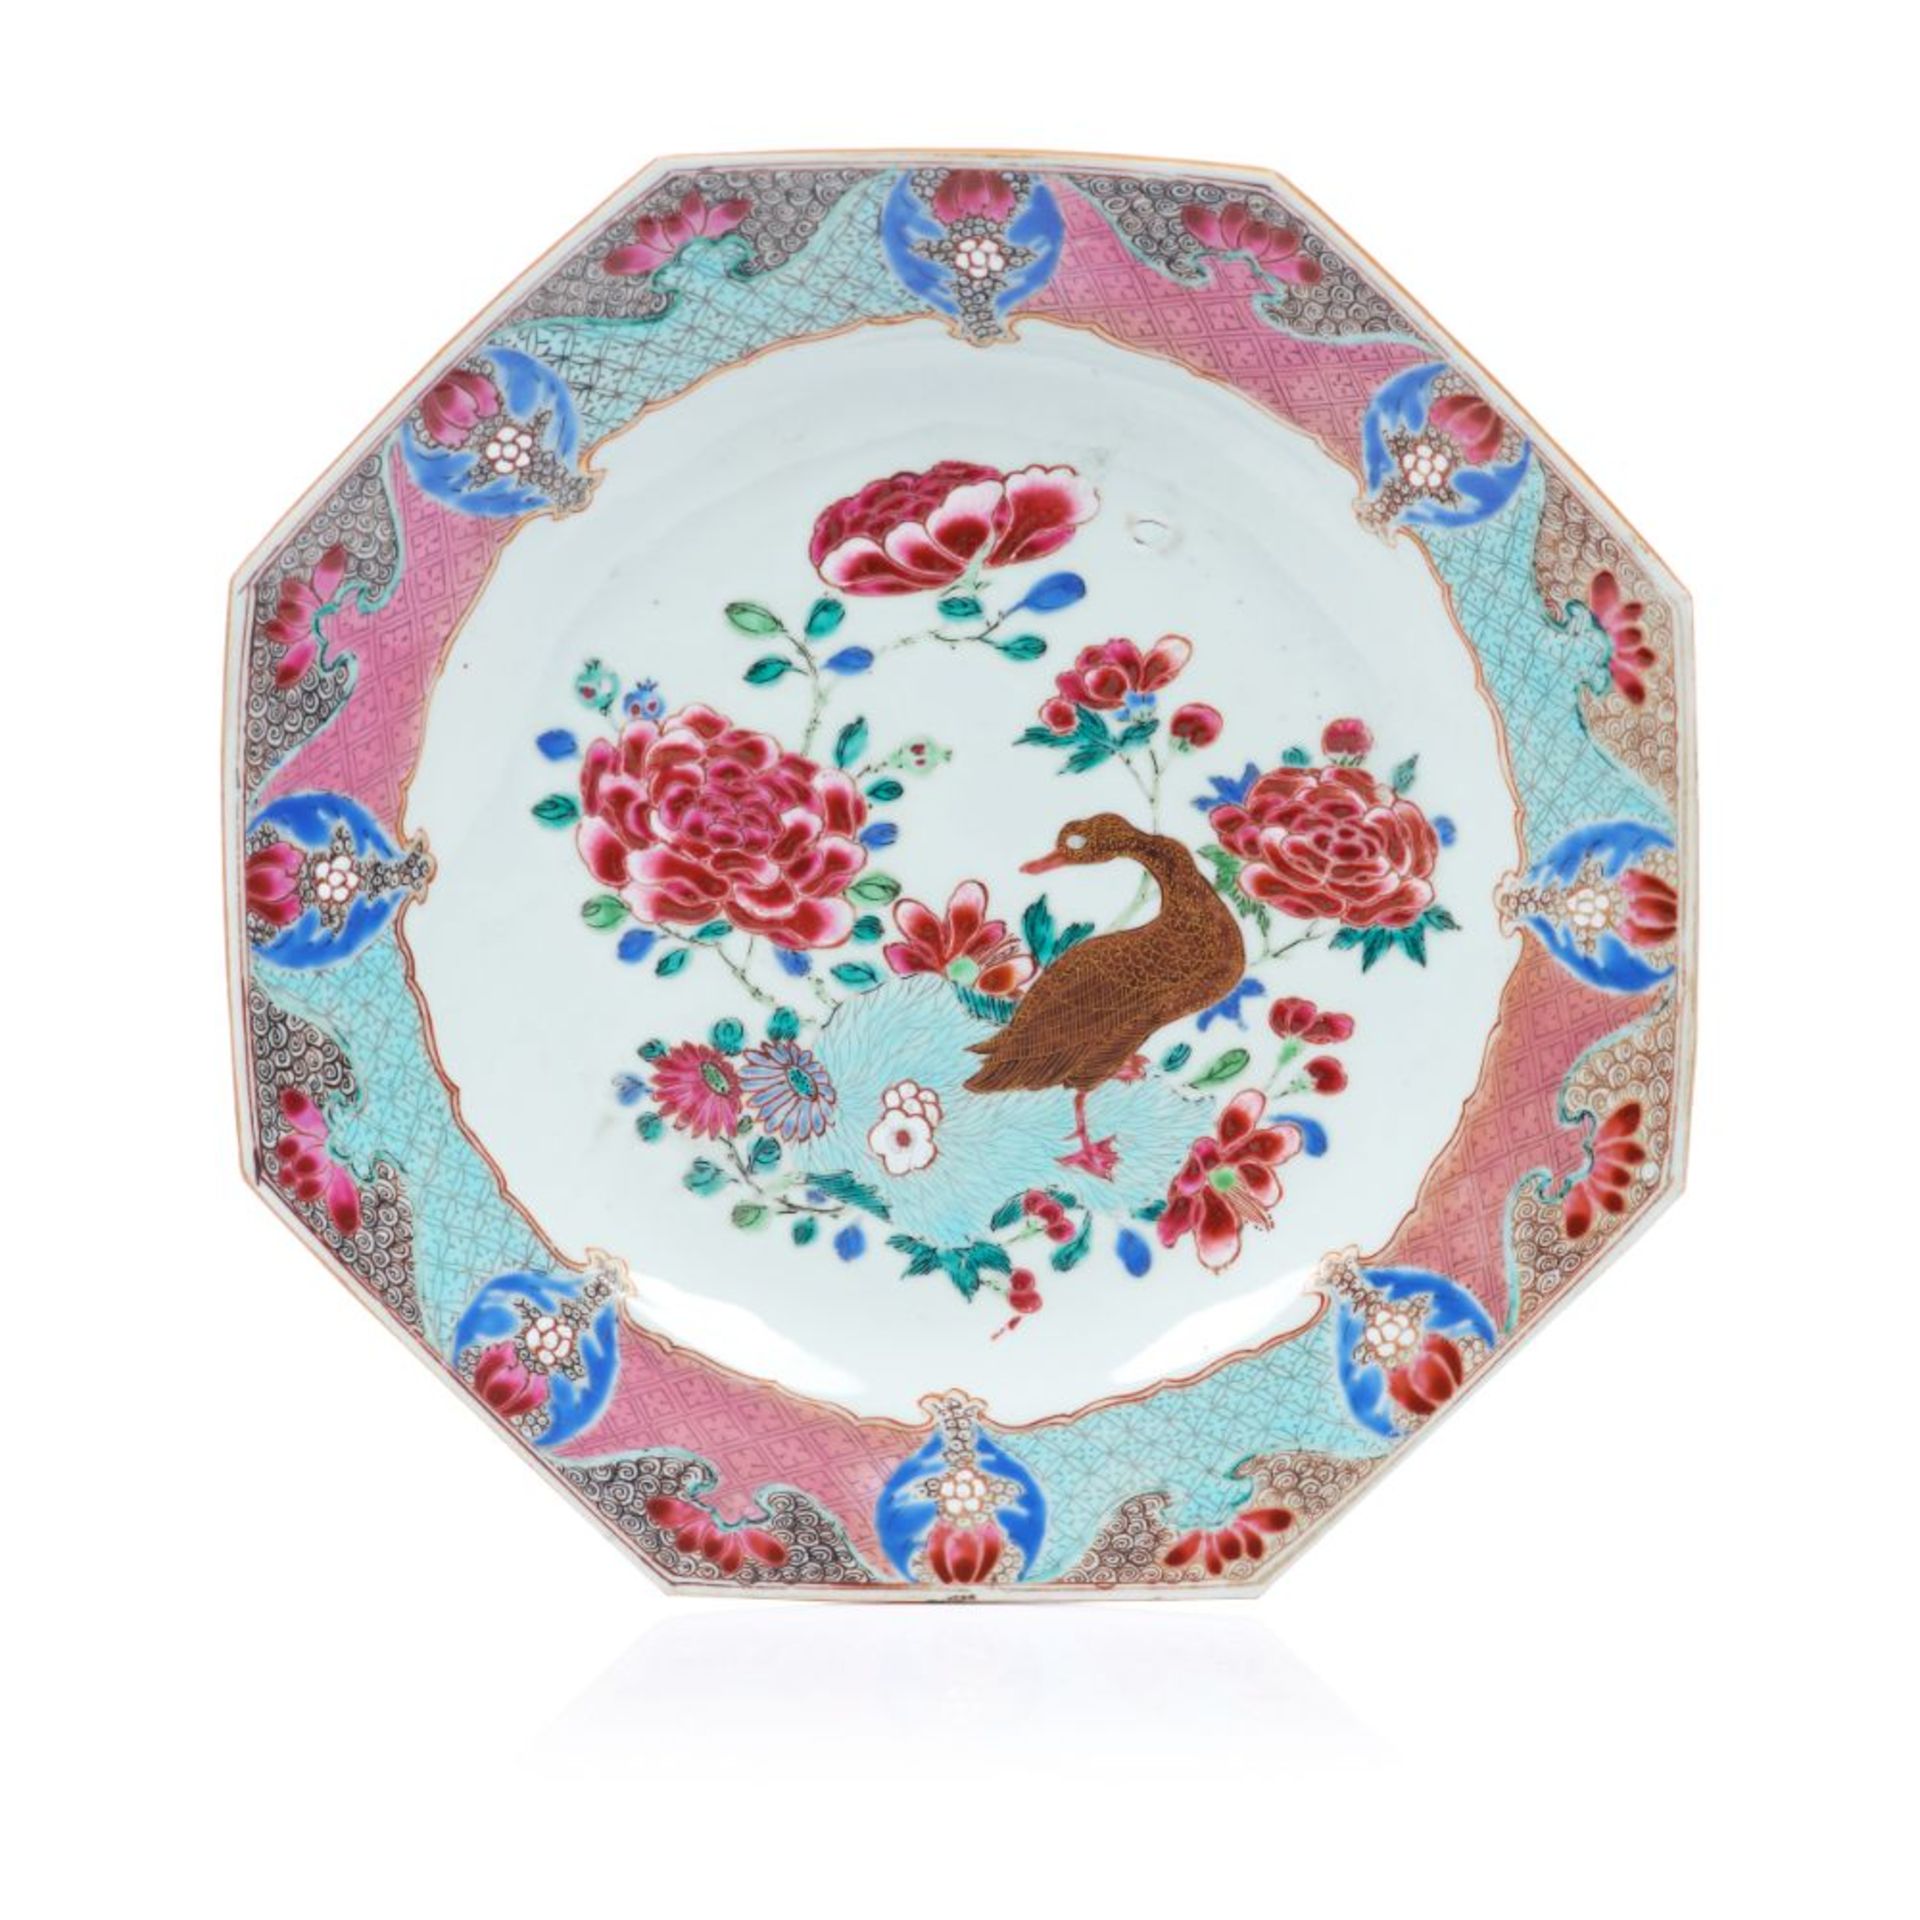 A large octagonal plate, Chinese export porcelain, Polychrome "Famille Rose" enamelled decoration of